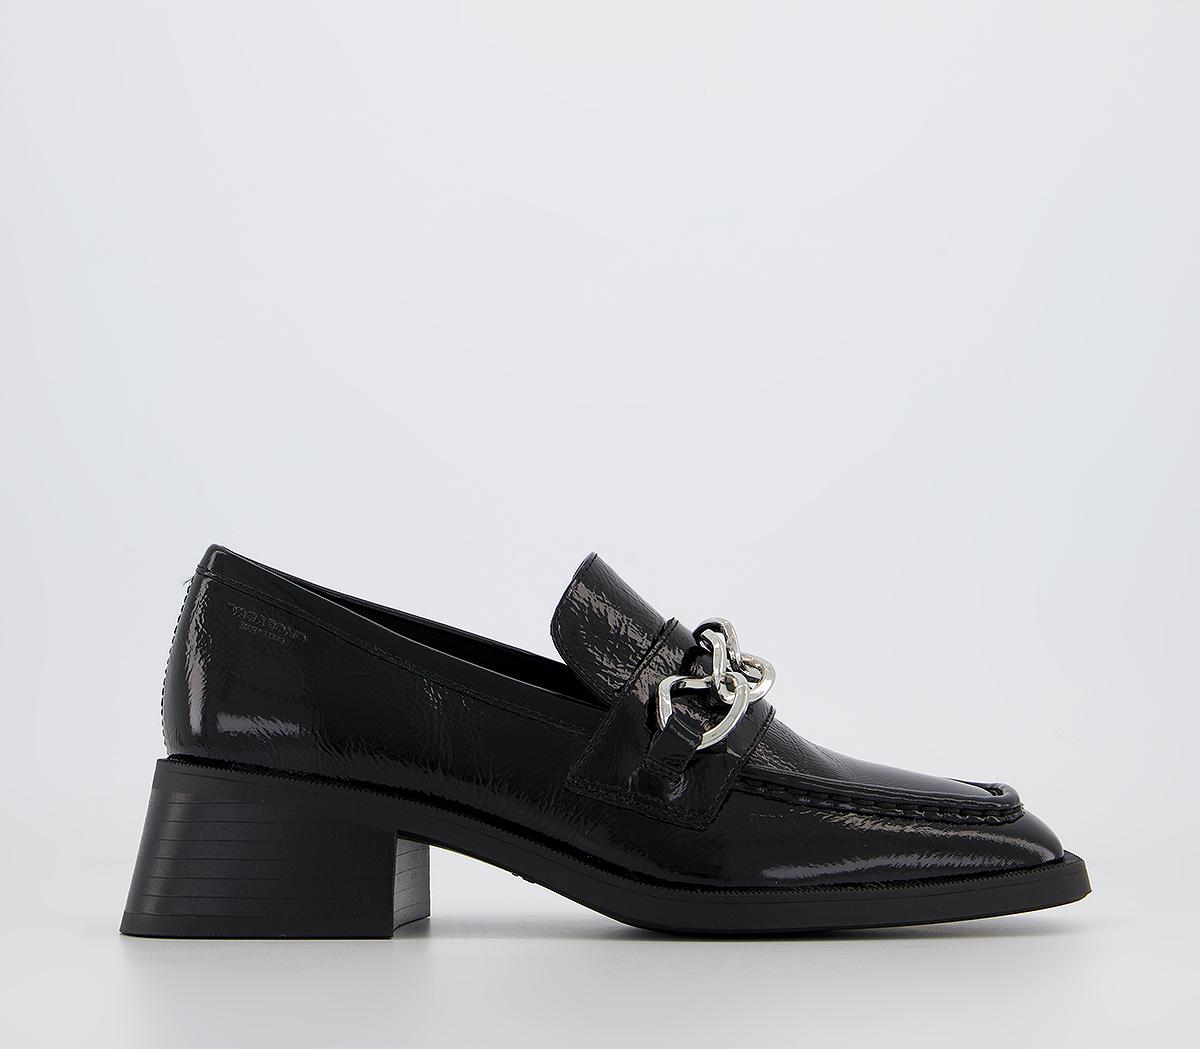 Vagabond Shoemakers Blanca Loafers Black Patent - Women’s Loafers